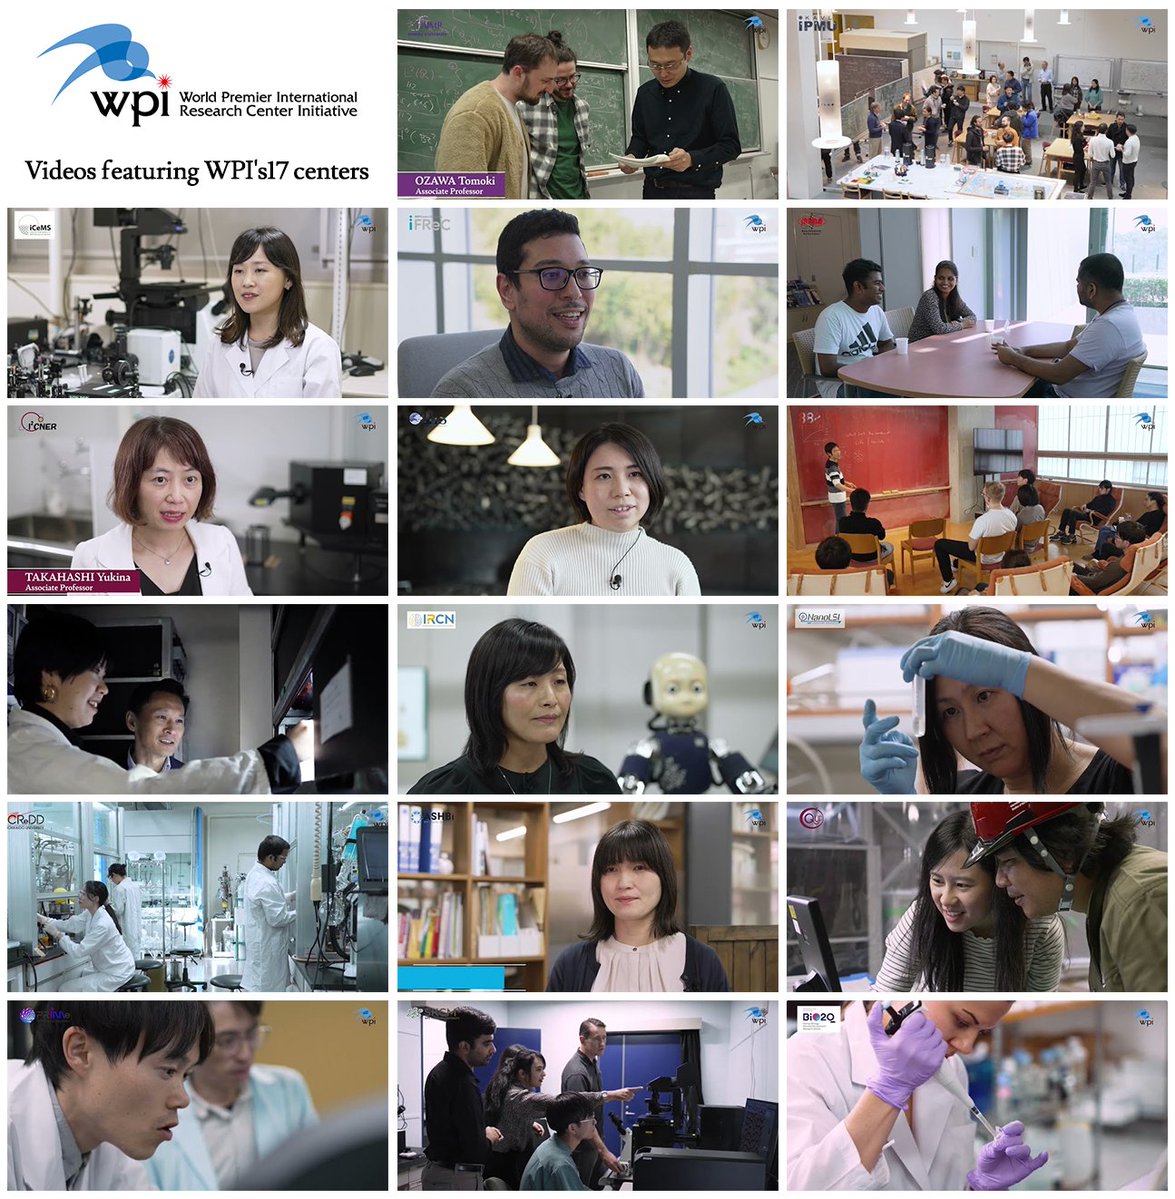 Have you heard of the World Premier International Research Center Initiative (WPI)? Check out the videos profiling the 17 WPI research centers in Japan! Starting today, we will feature one center each week on X! youtube.com/playlist?list=… #JSPS #WPI